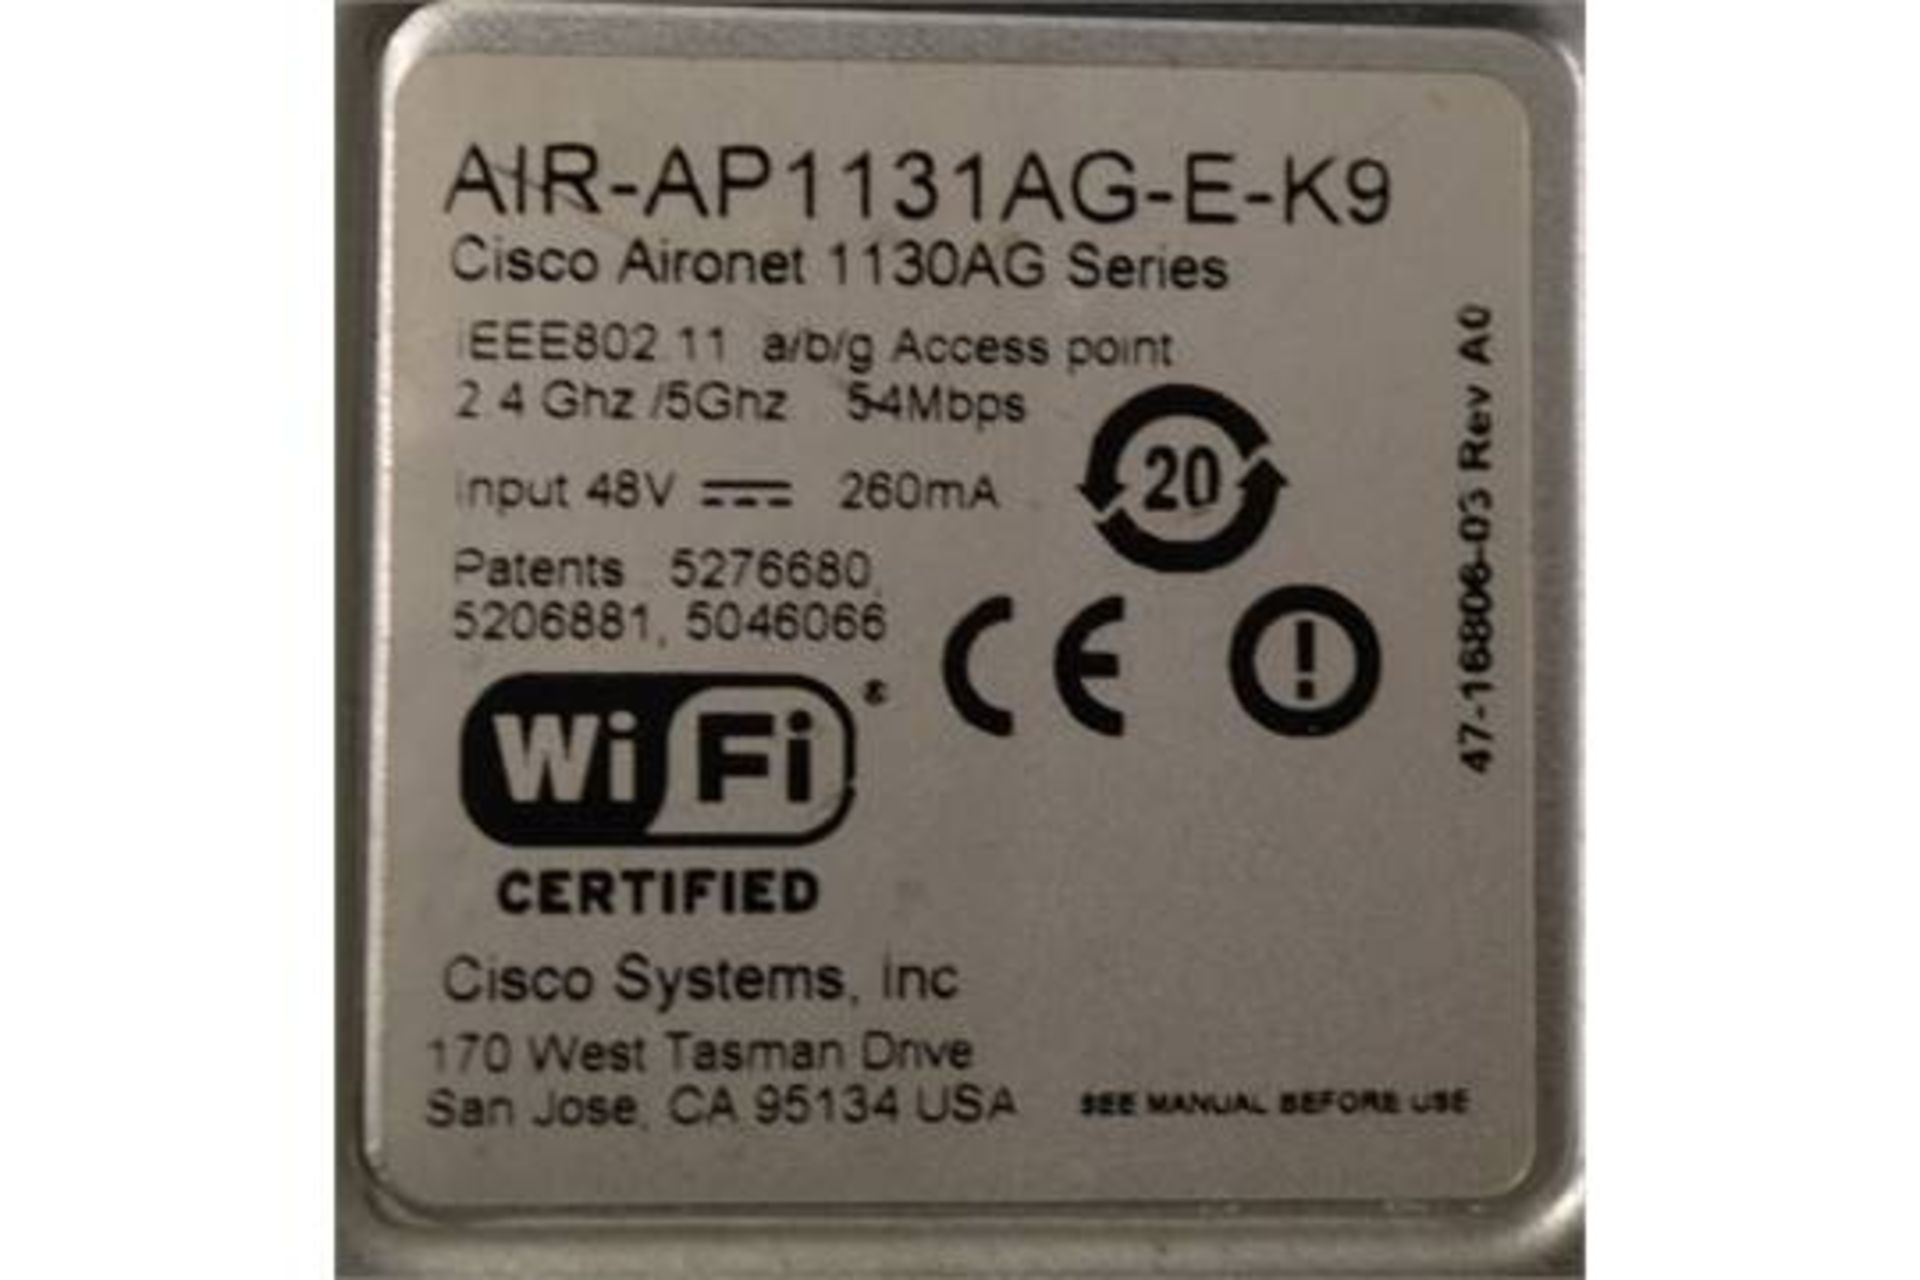 1 x Cisco Aironet 1131AG 54 Mbps Wireless G Router - Model AIR-AP1131AG-E-K9 - Low-profile - Image 2 of 4